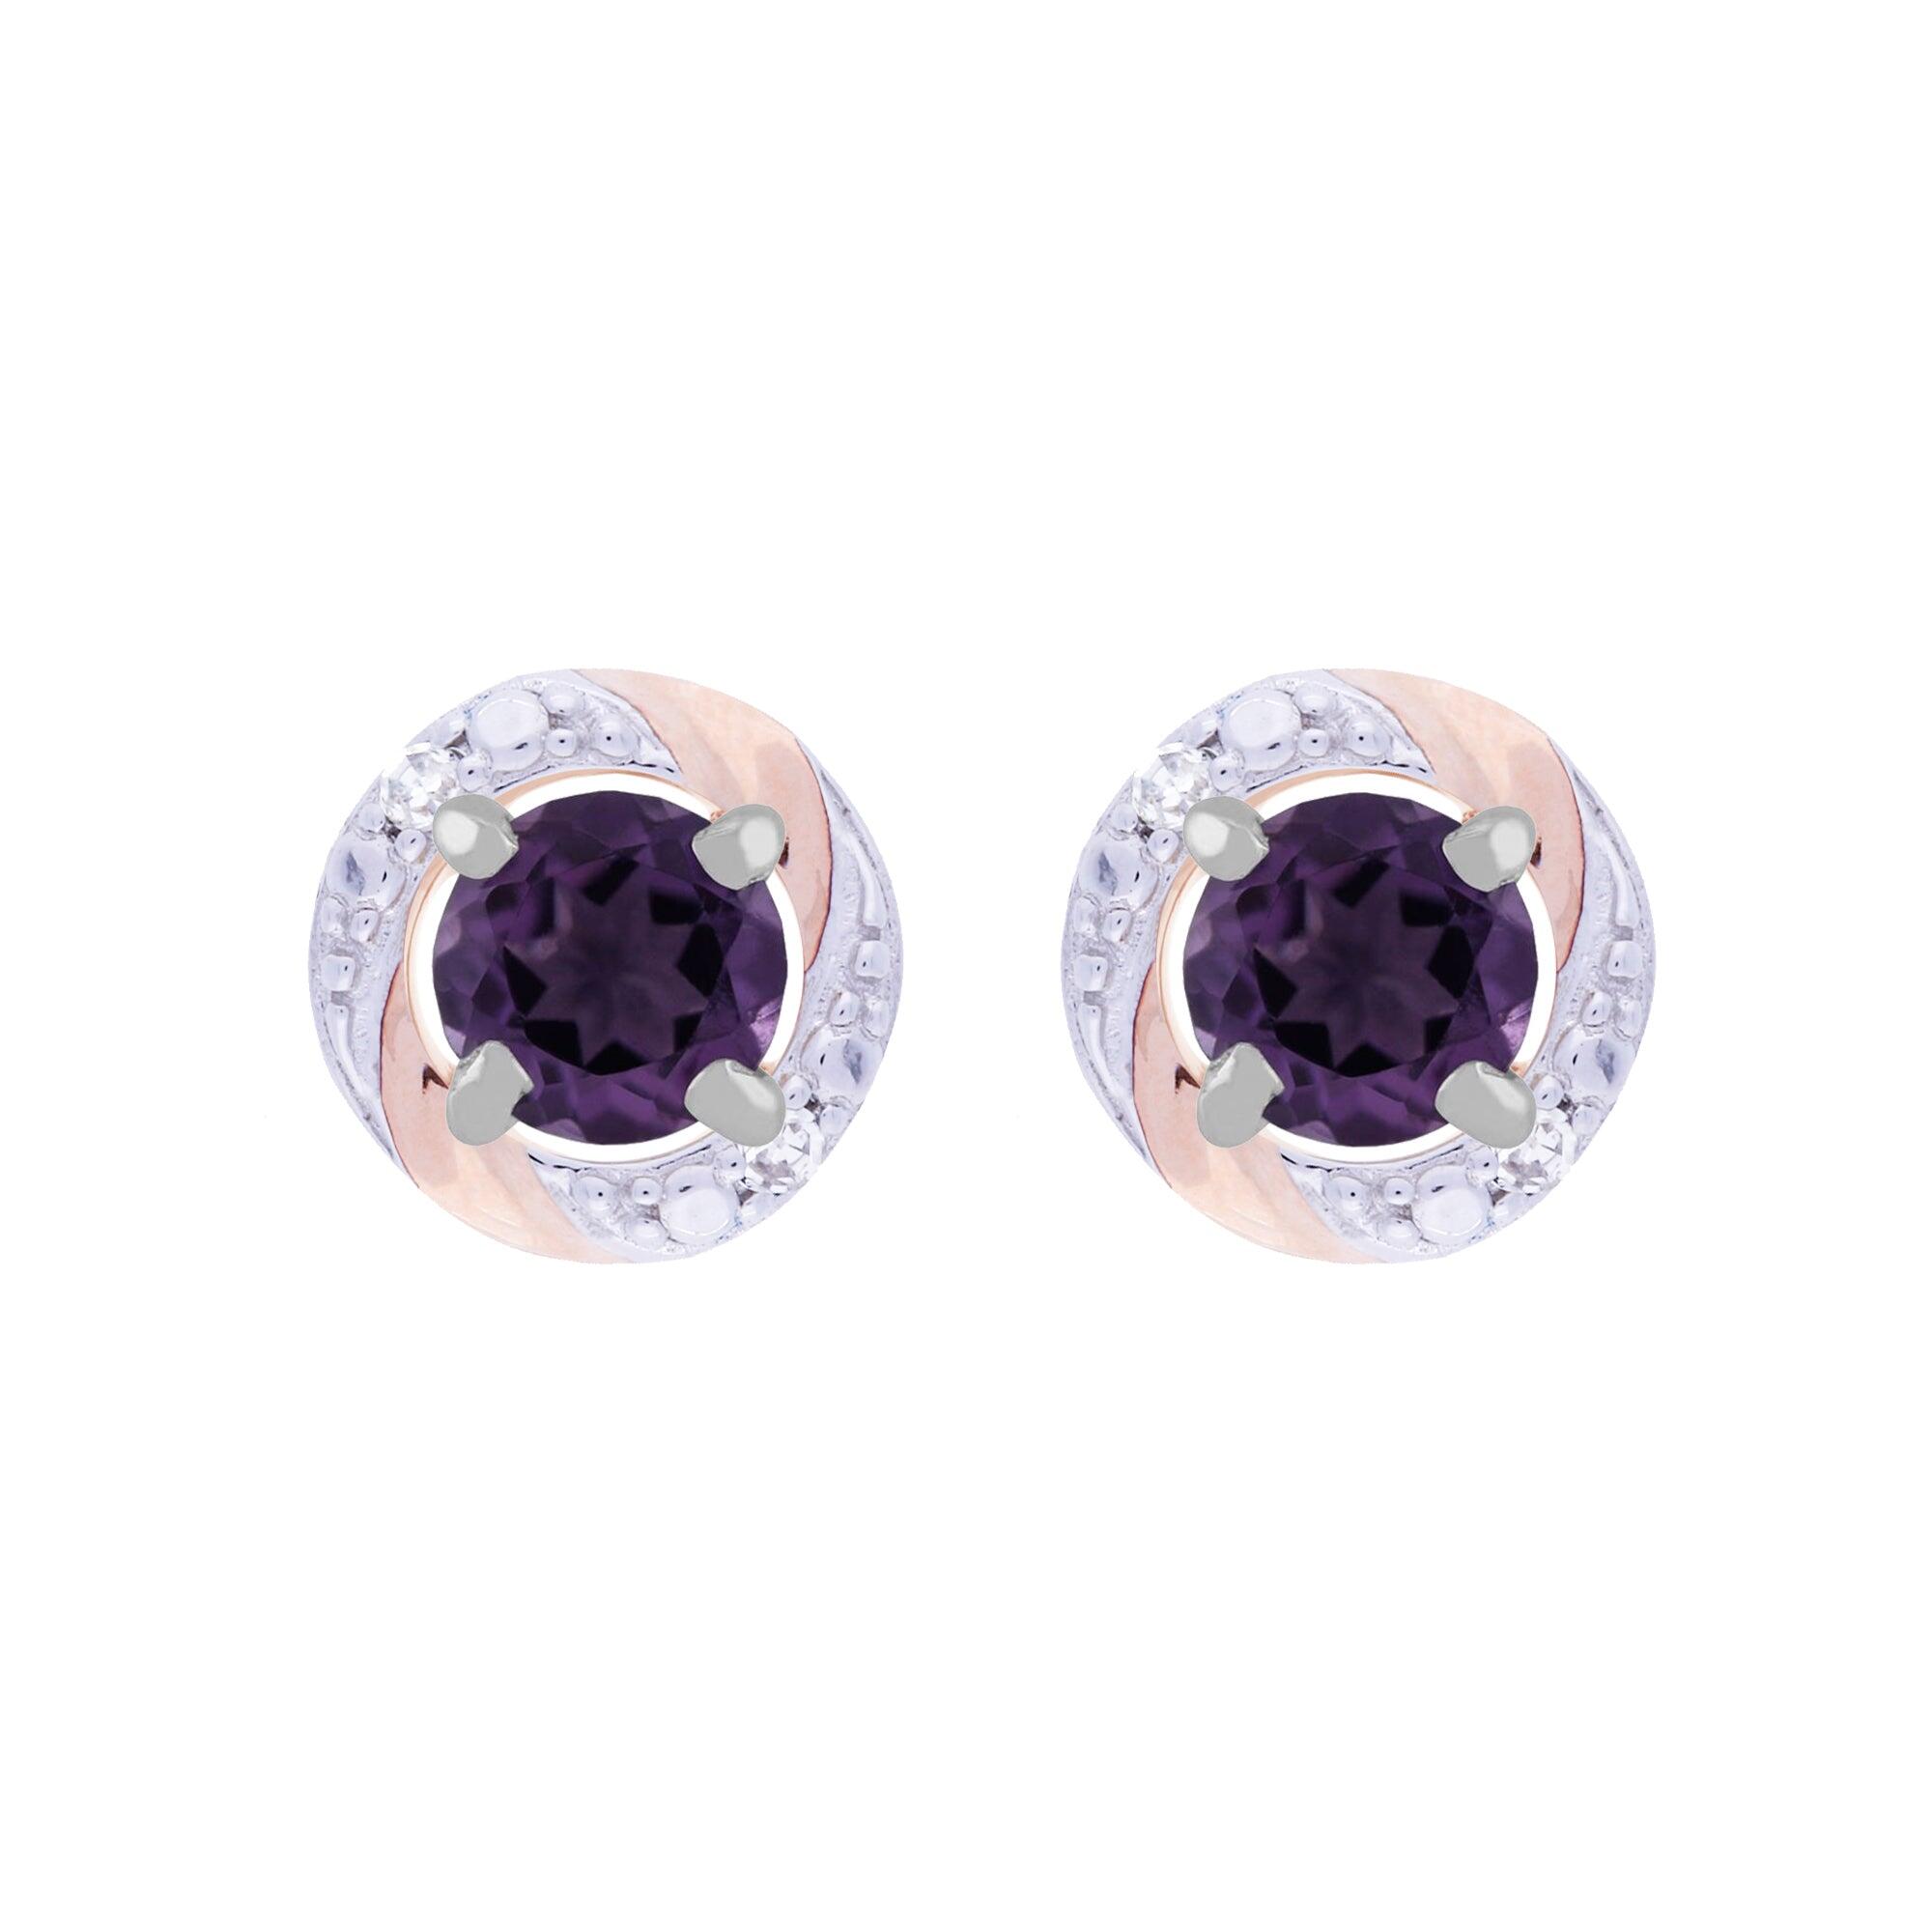 Classic Round Amethyst Stud Earrings with Detachable Diamond Round Earrings Jacket Set in 9ct White Gold